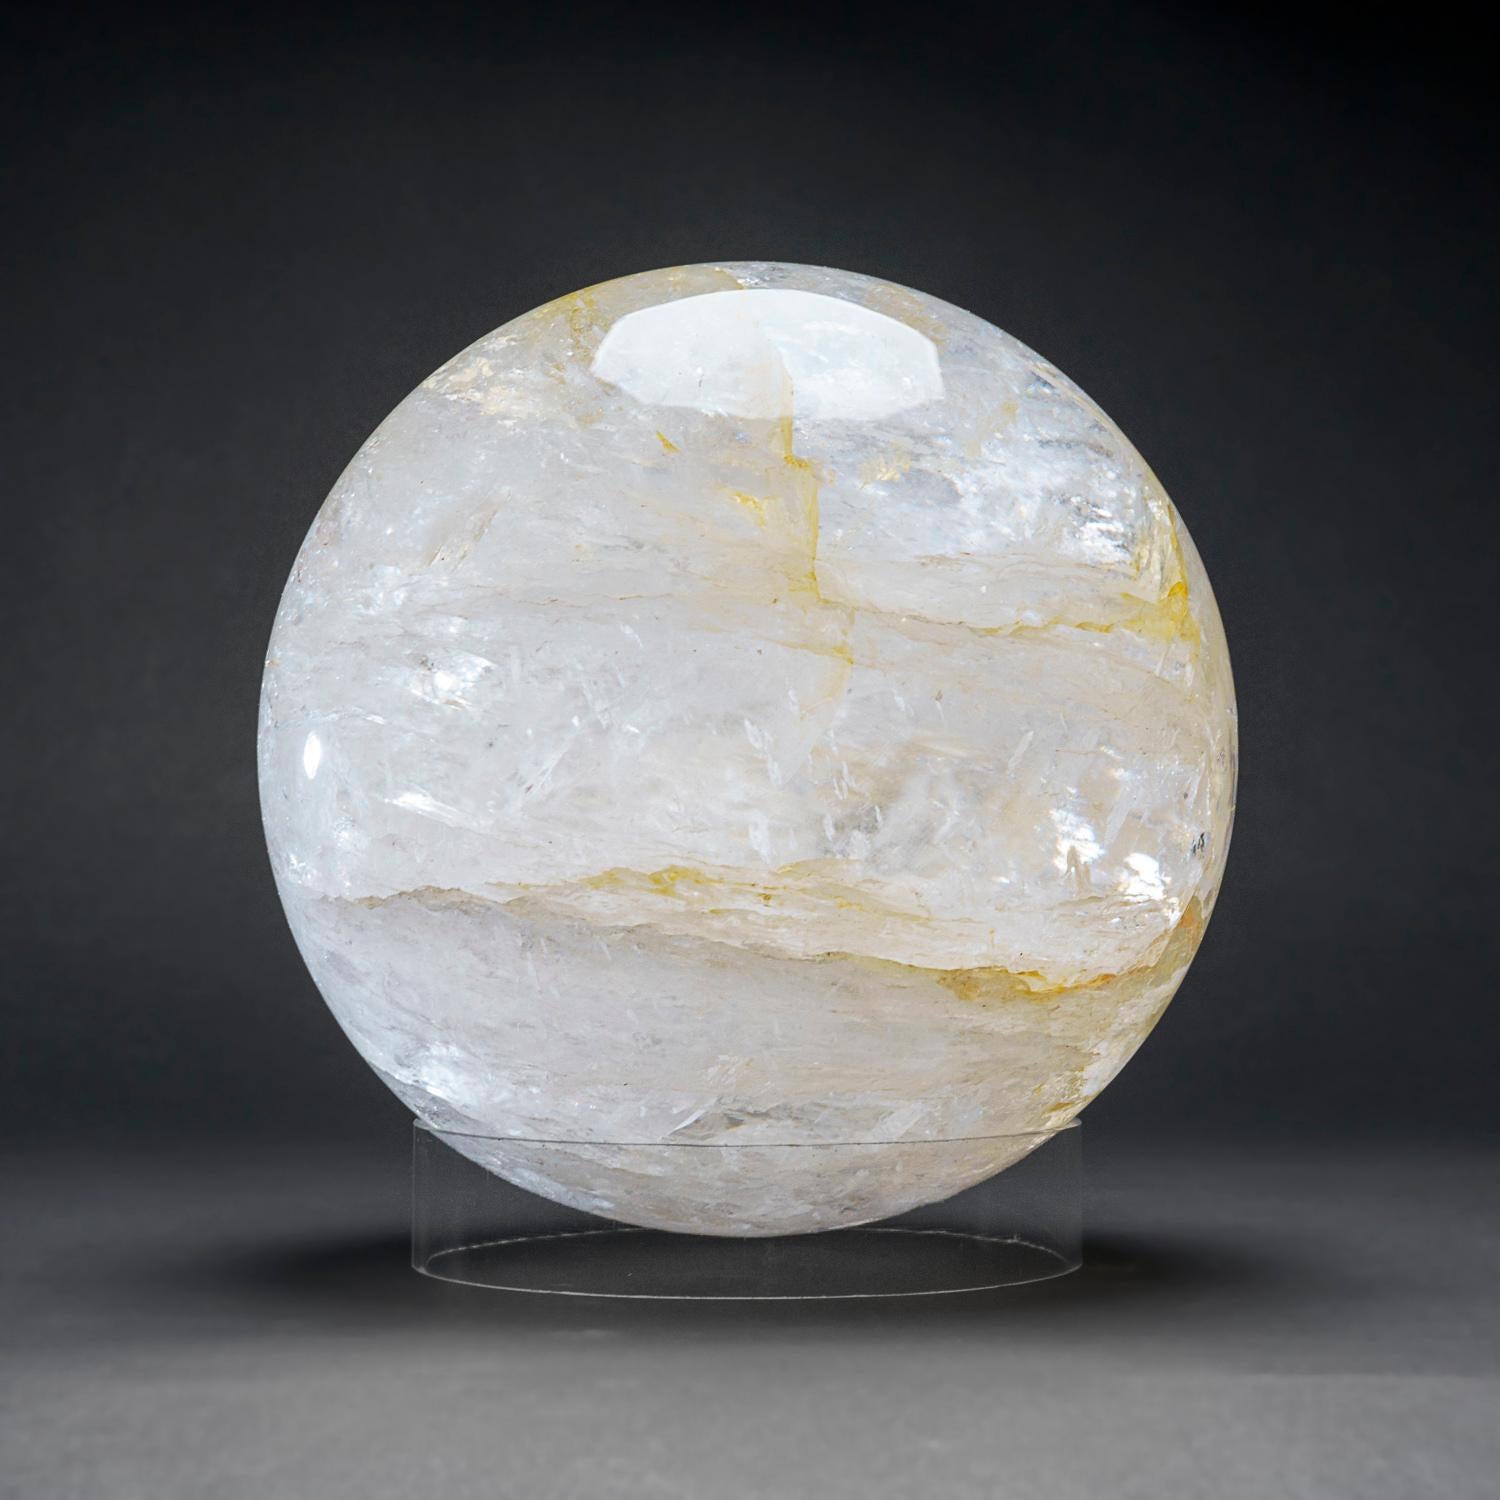 Brazilian Large Genuine Polished Clear Quartz Sphere from Brazil (34 lbs) For Sale